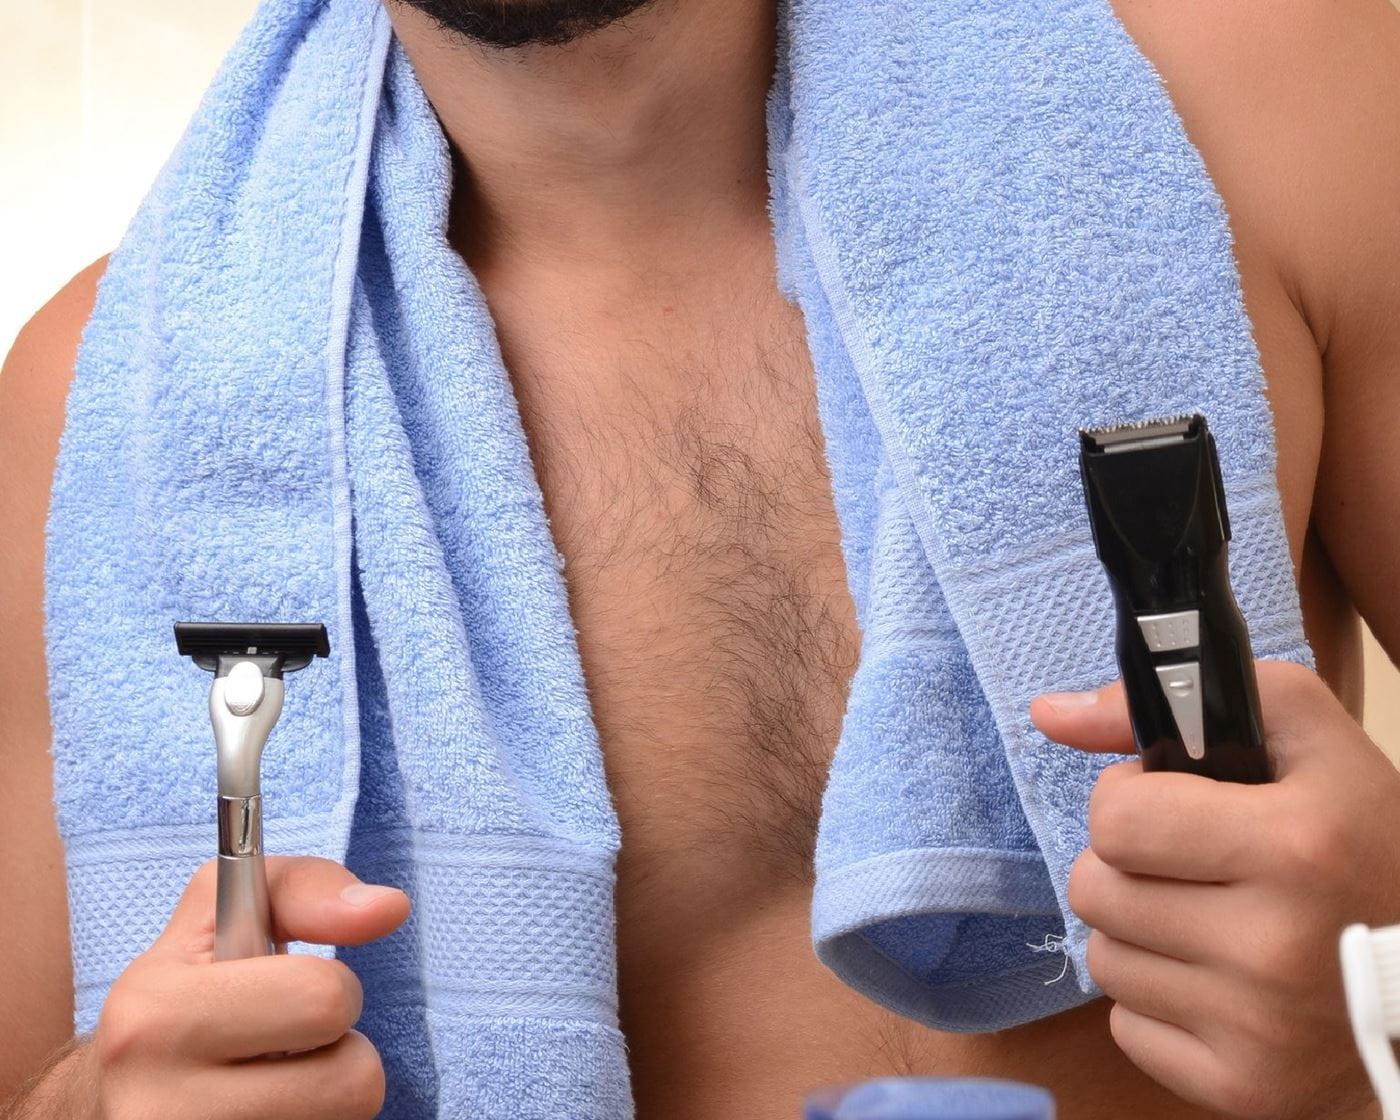 Shaving the male intimate area